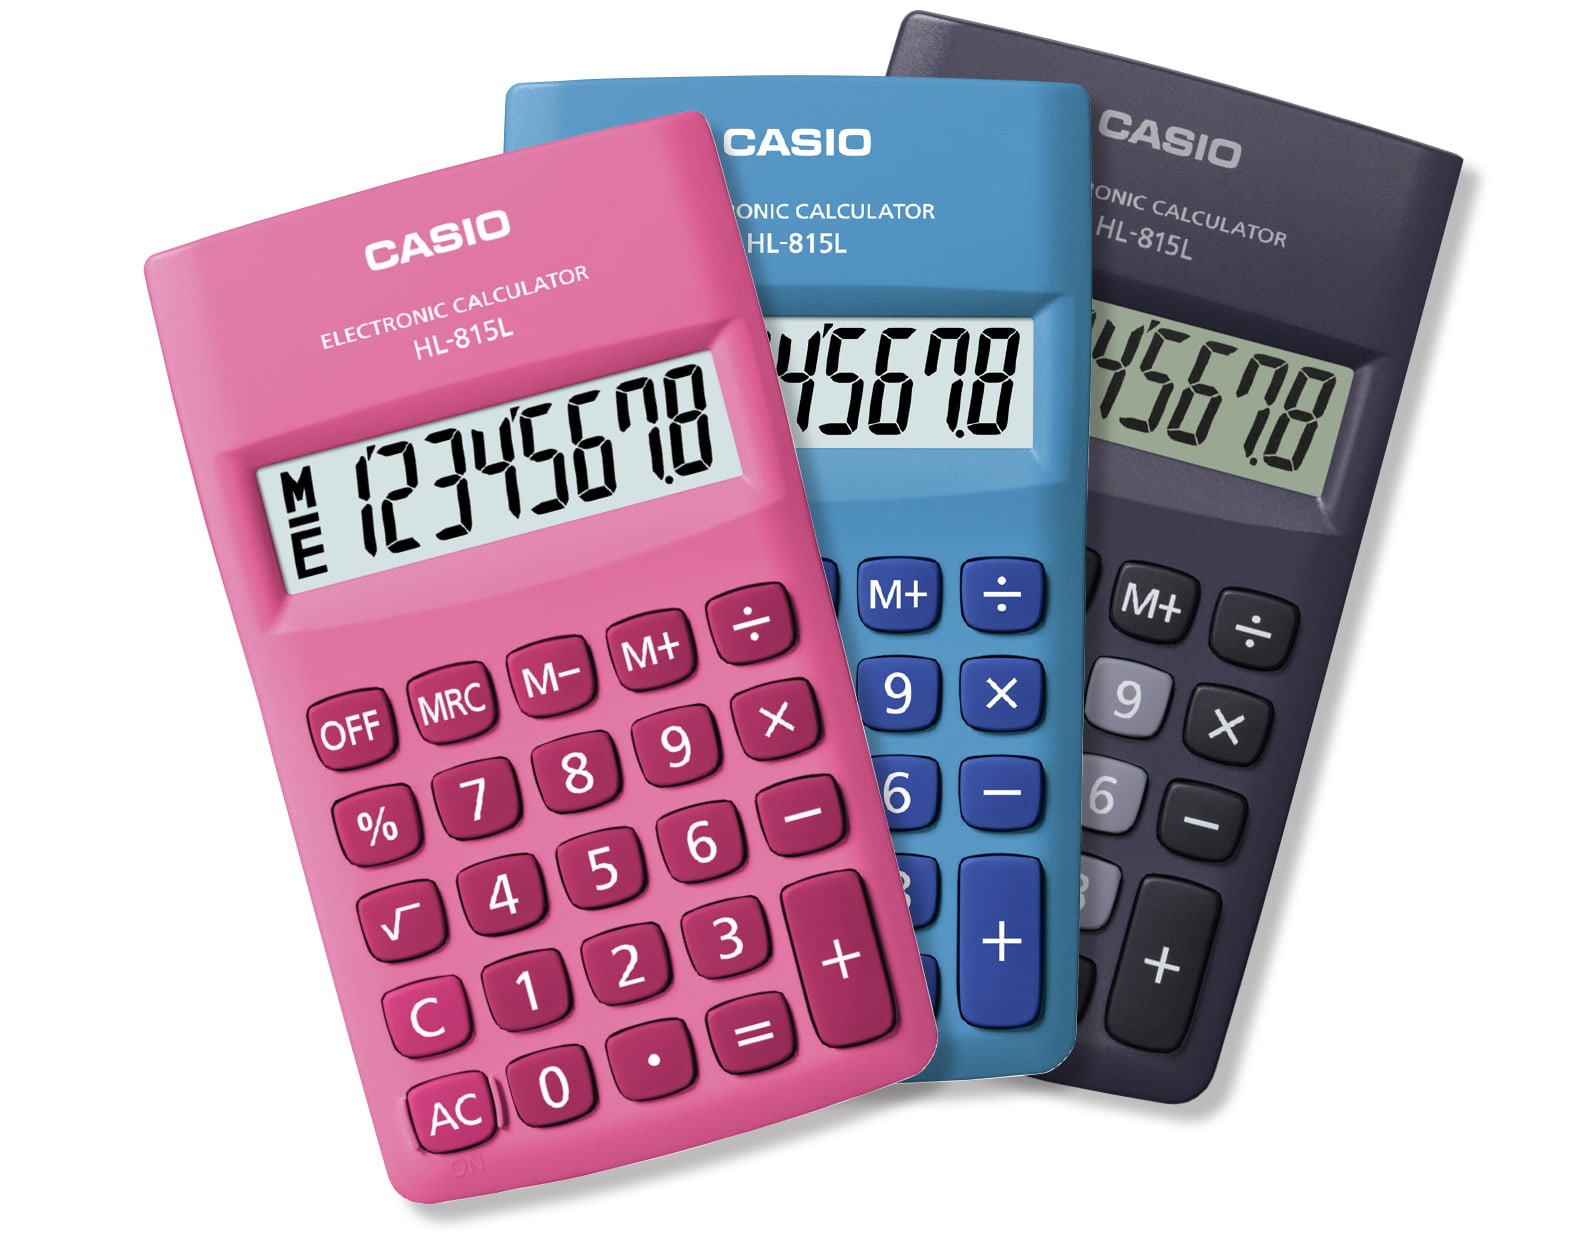 Tax Tools For 2009 - Free Calculators Reduce Taxes